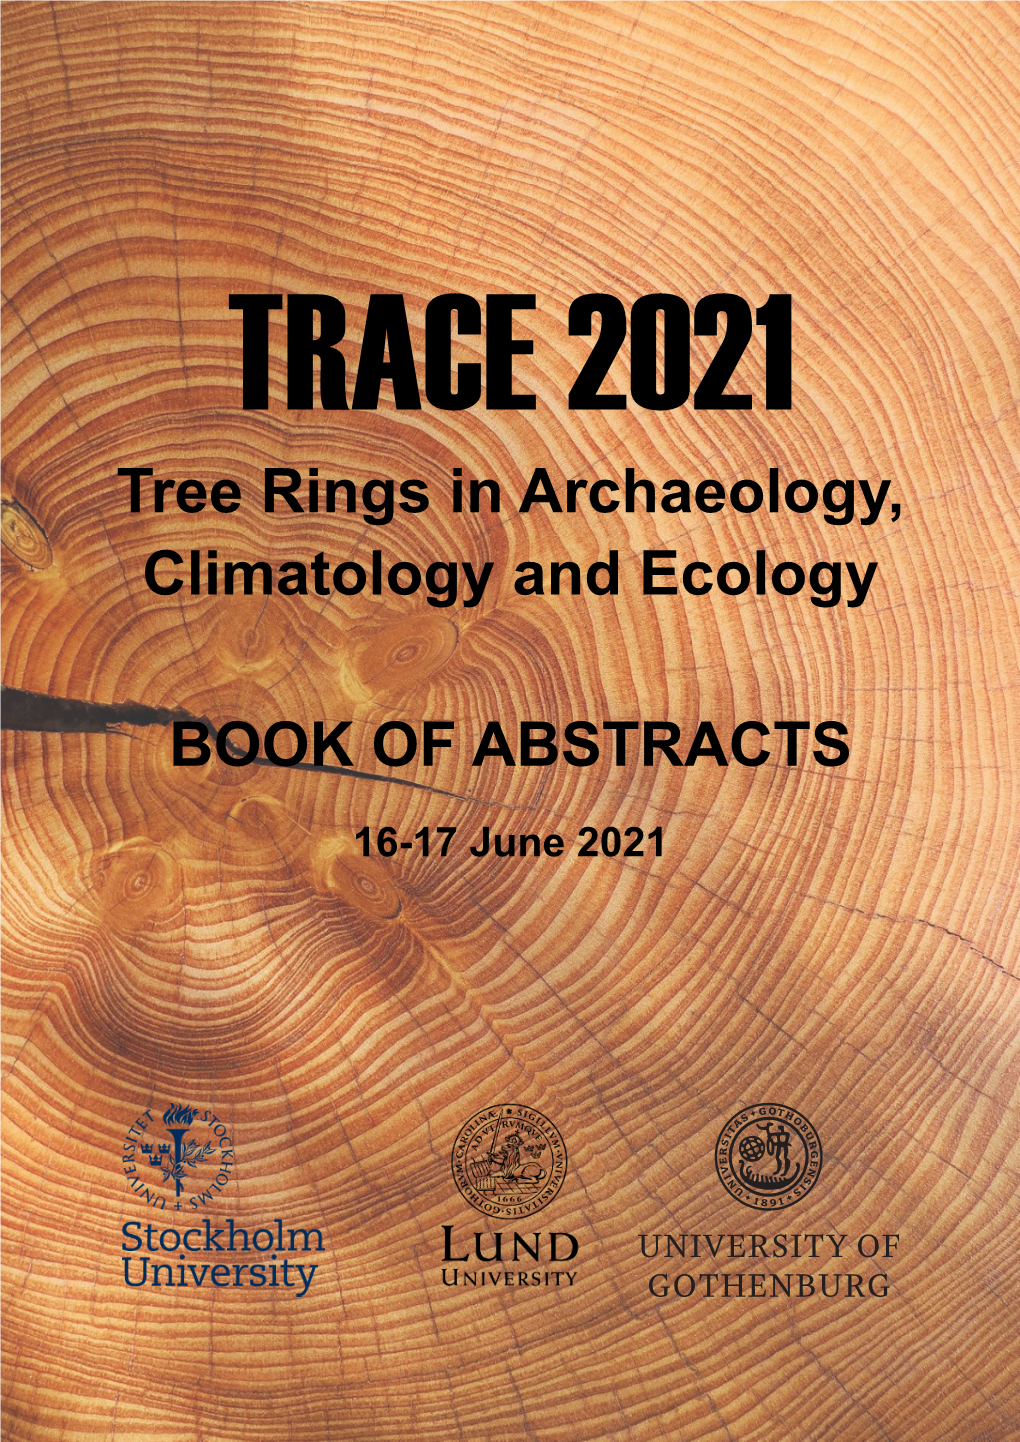 Book of Abstracts TRACE 2021